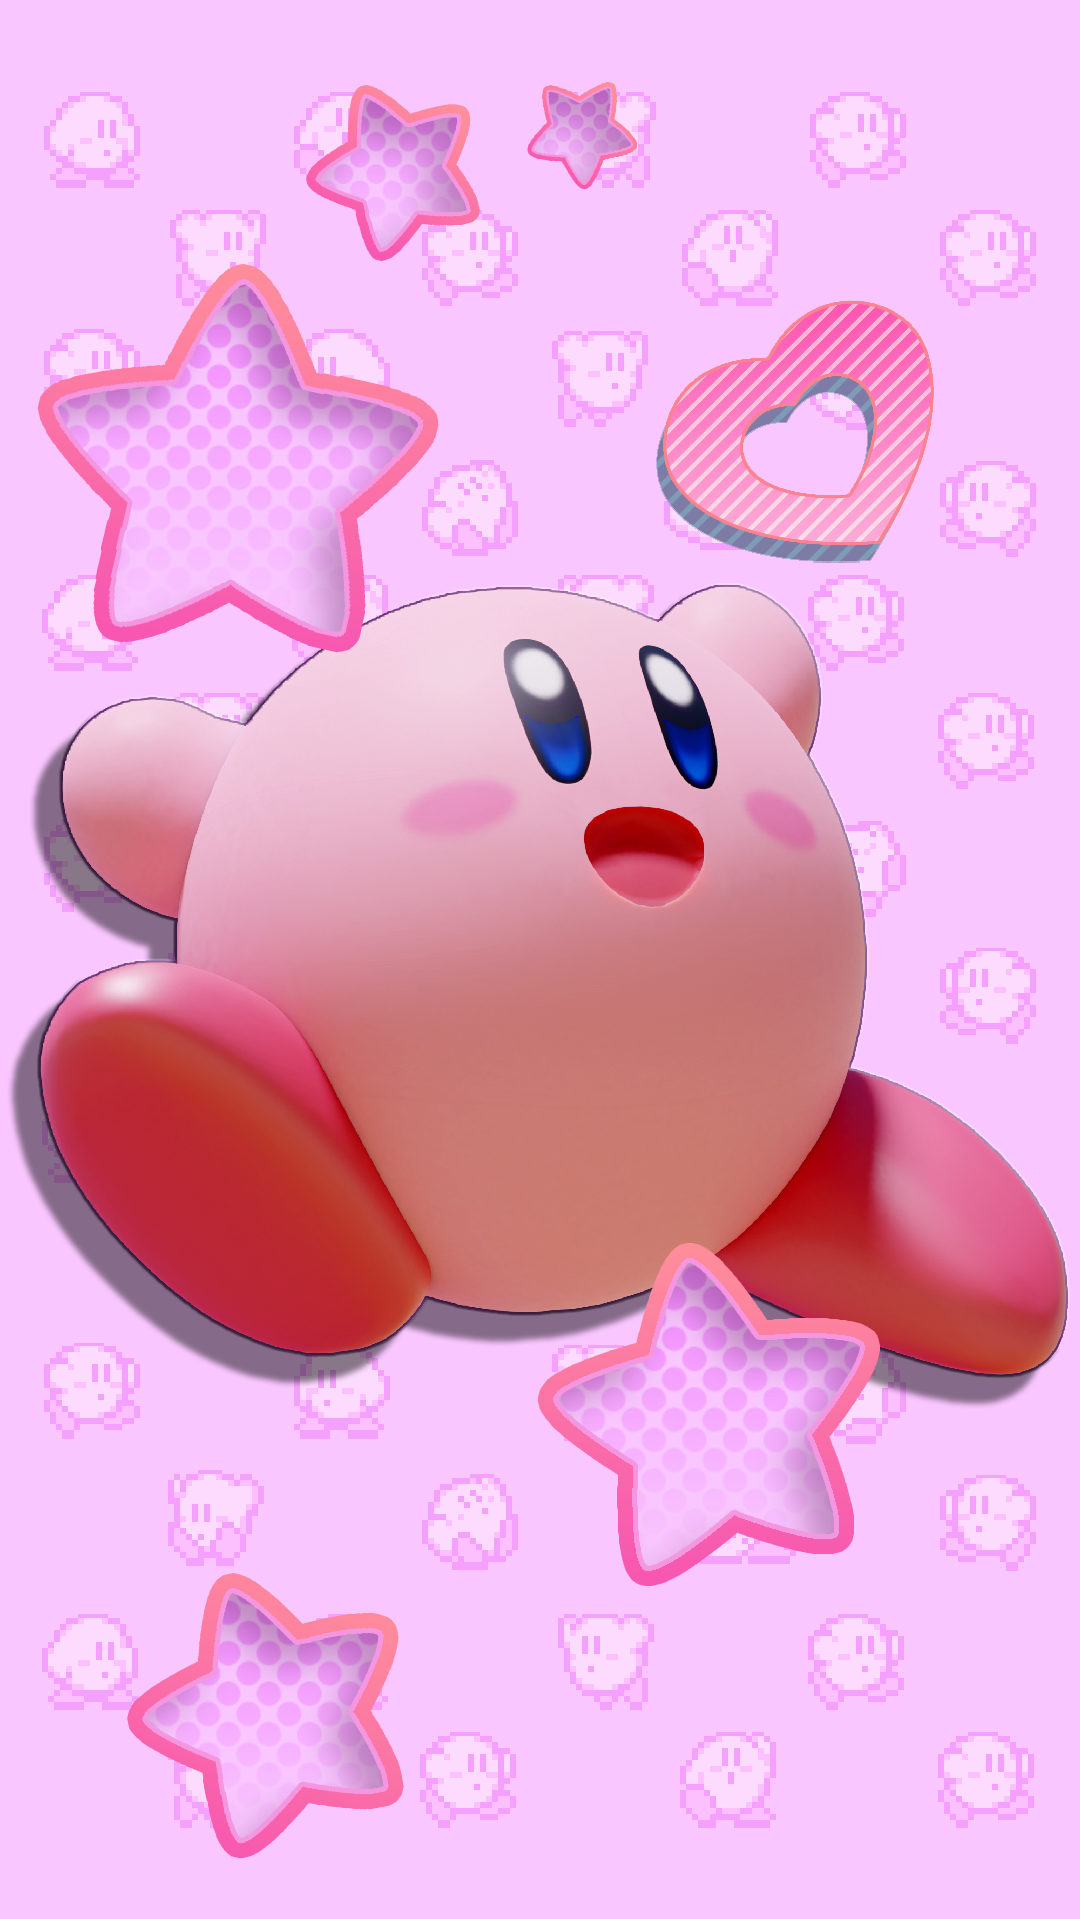 POYO A phone wallpaper ive made feel free to use it rKirby